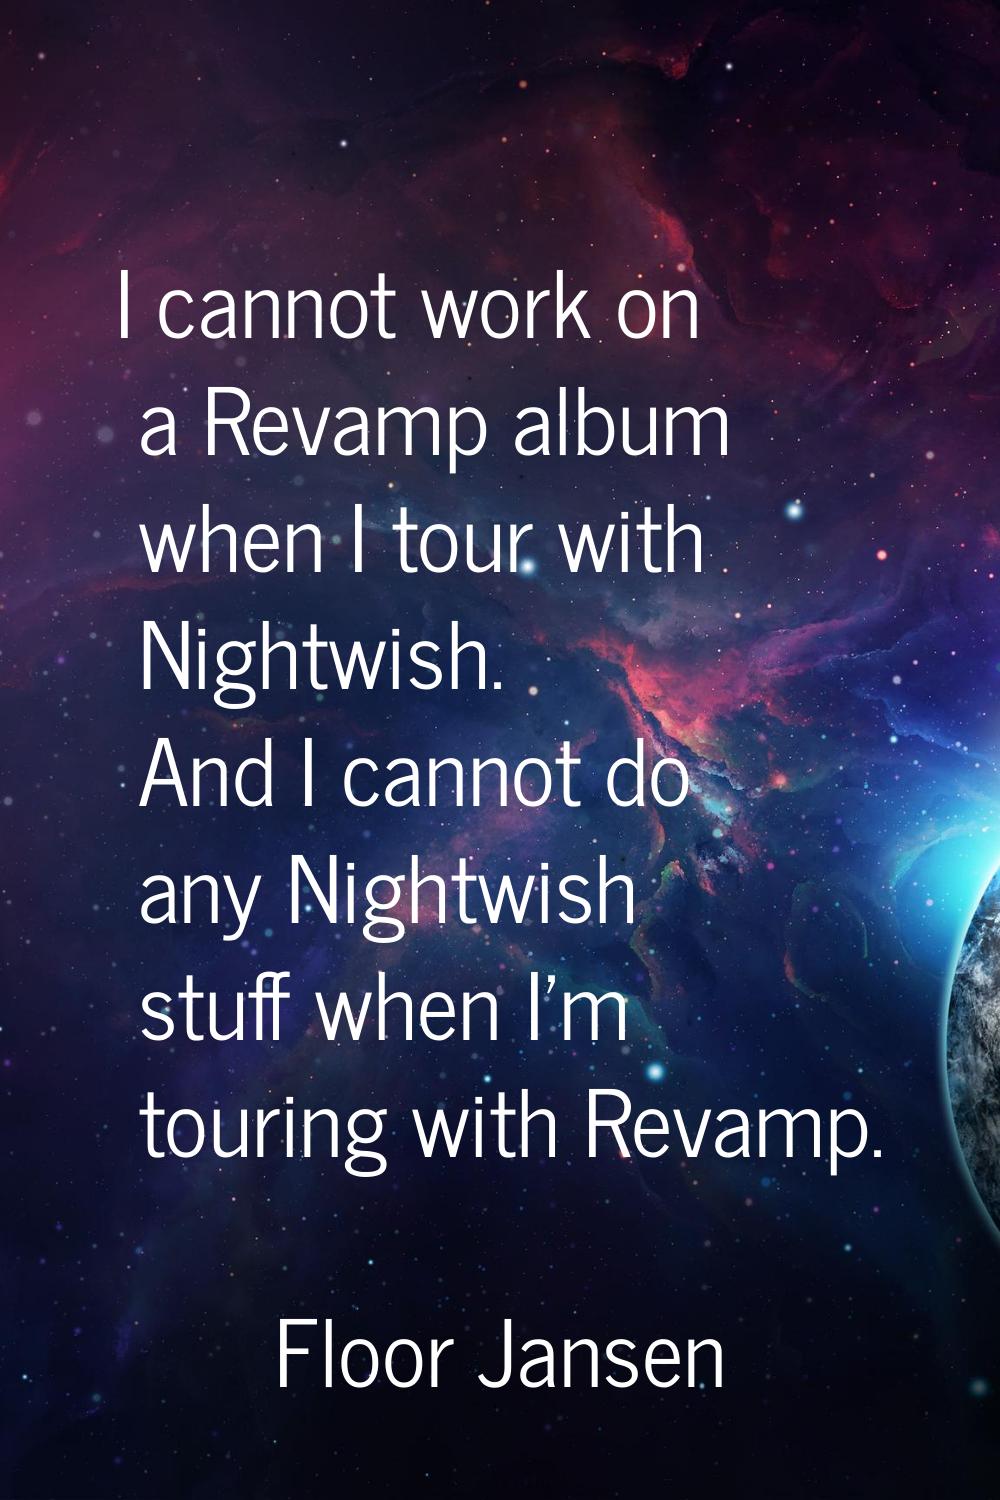 I cannot work on a Revamp album when I tour with Nightwish. And I cannot do any Nightwish stuff whe